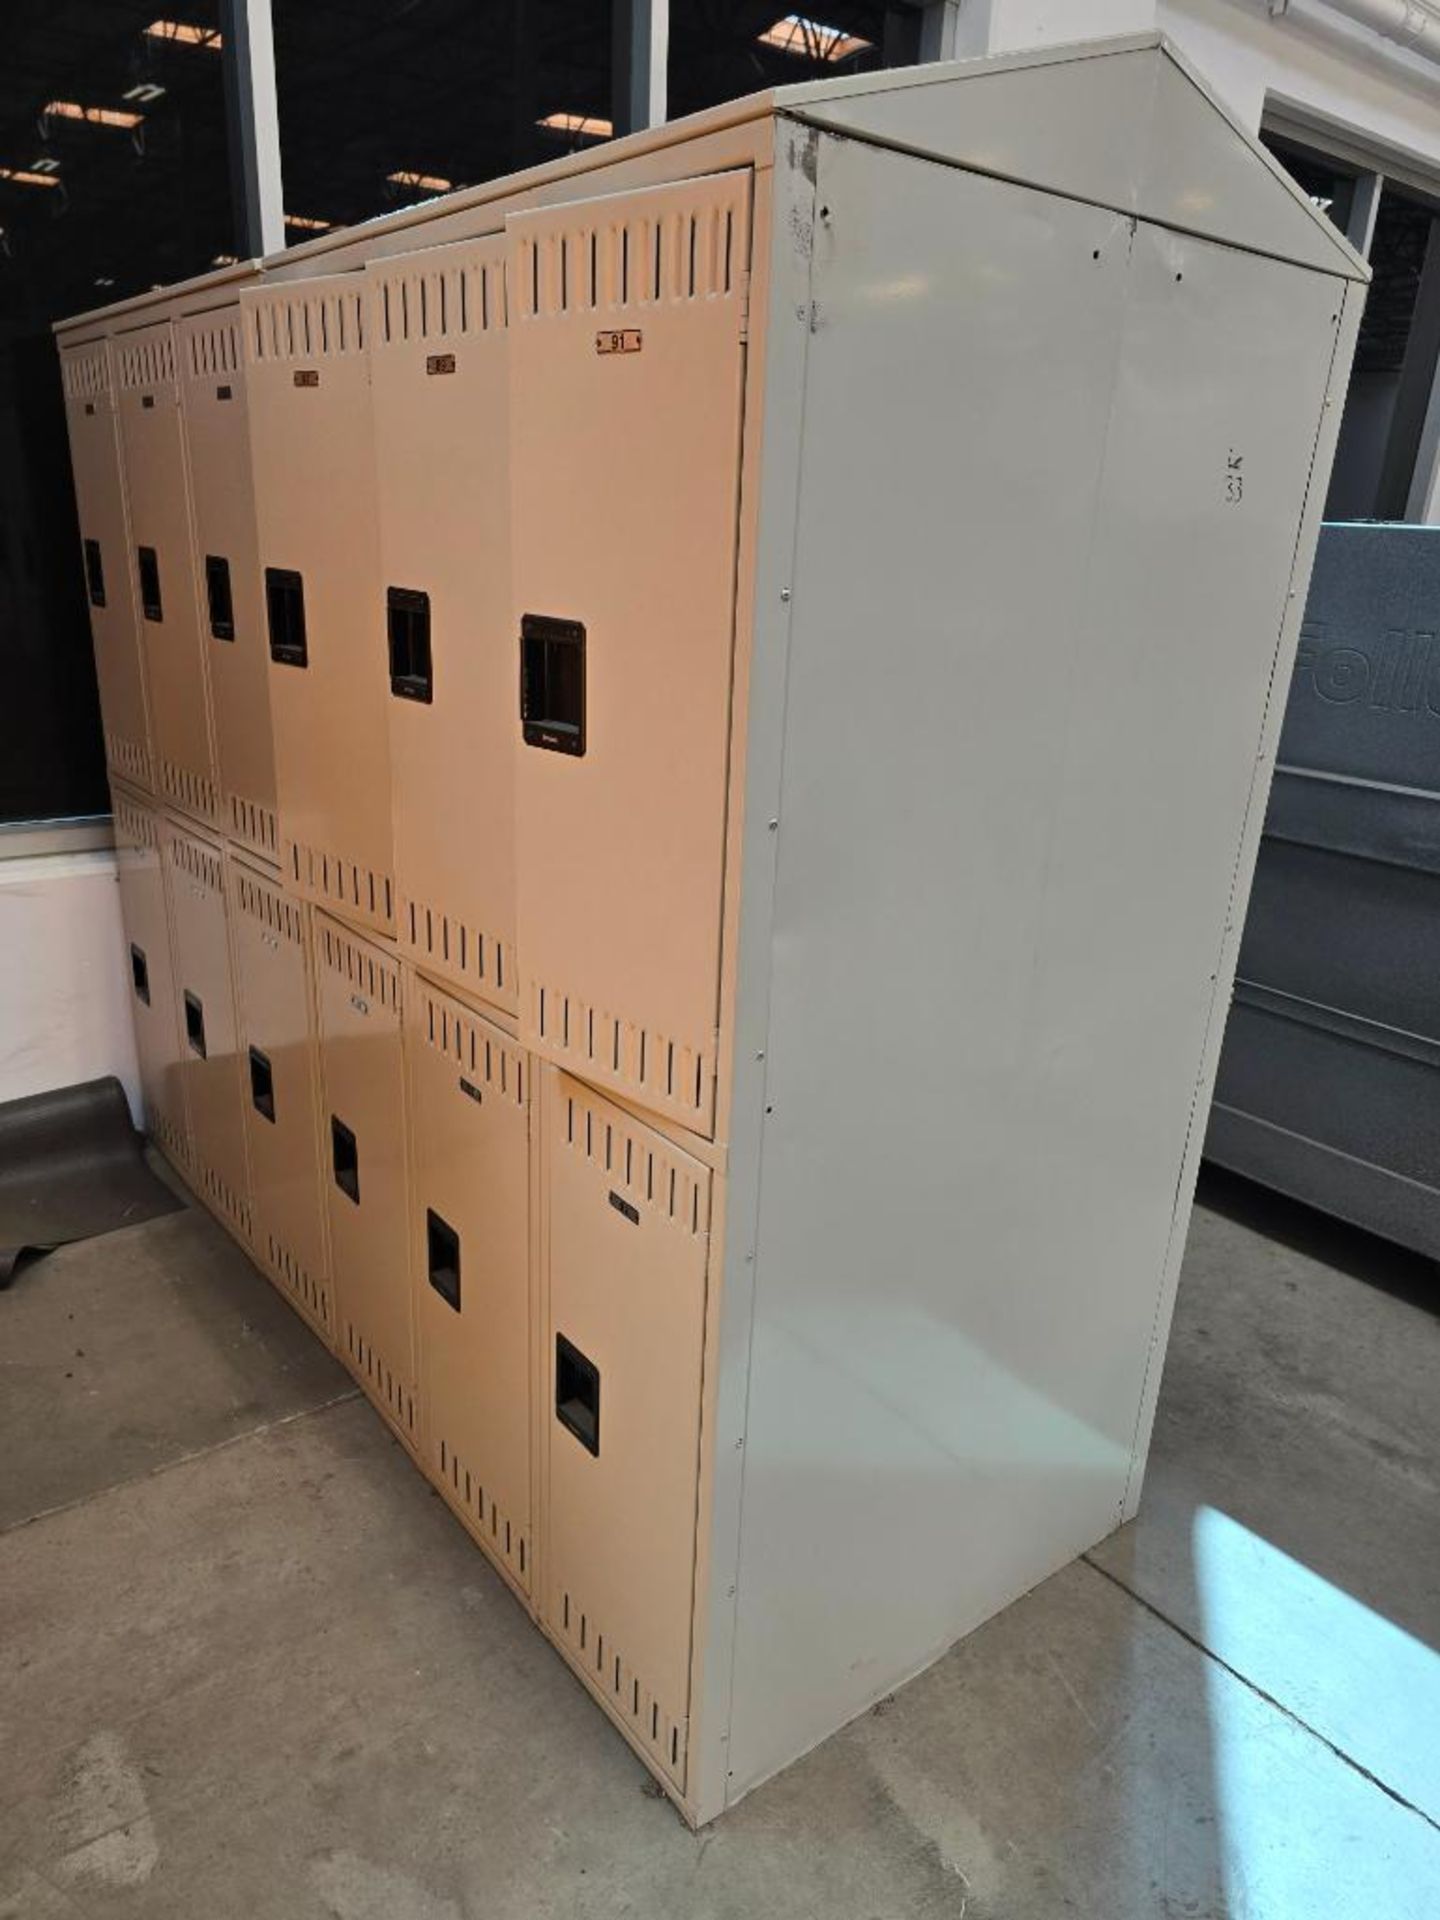 (24) Bank Tennsco Employee Locker System ($100 Loading Fee Will Be Added To Buyer's Invoice)